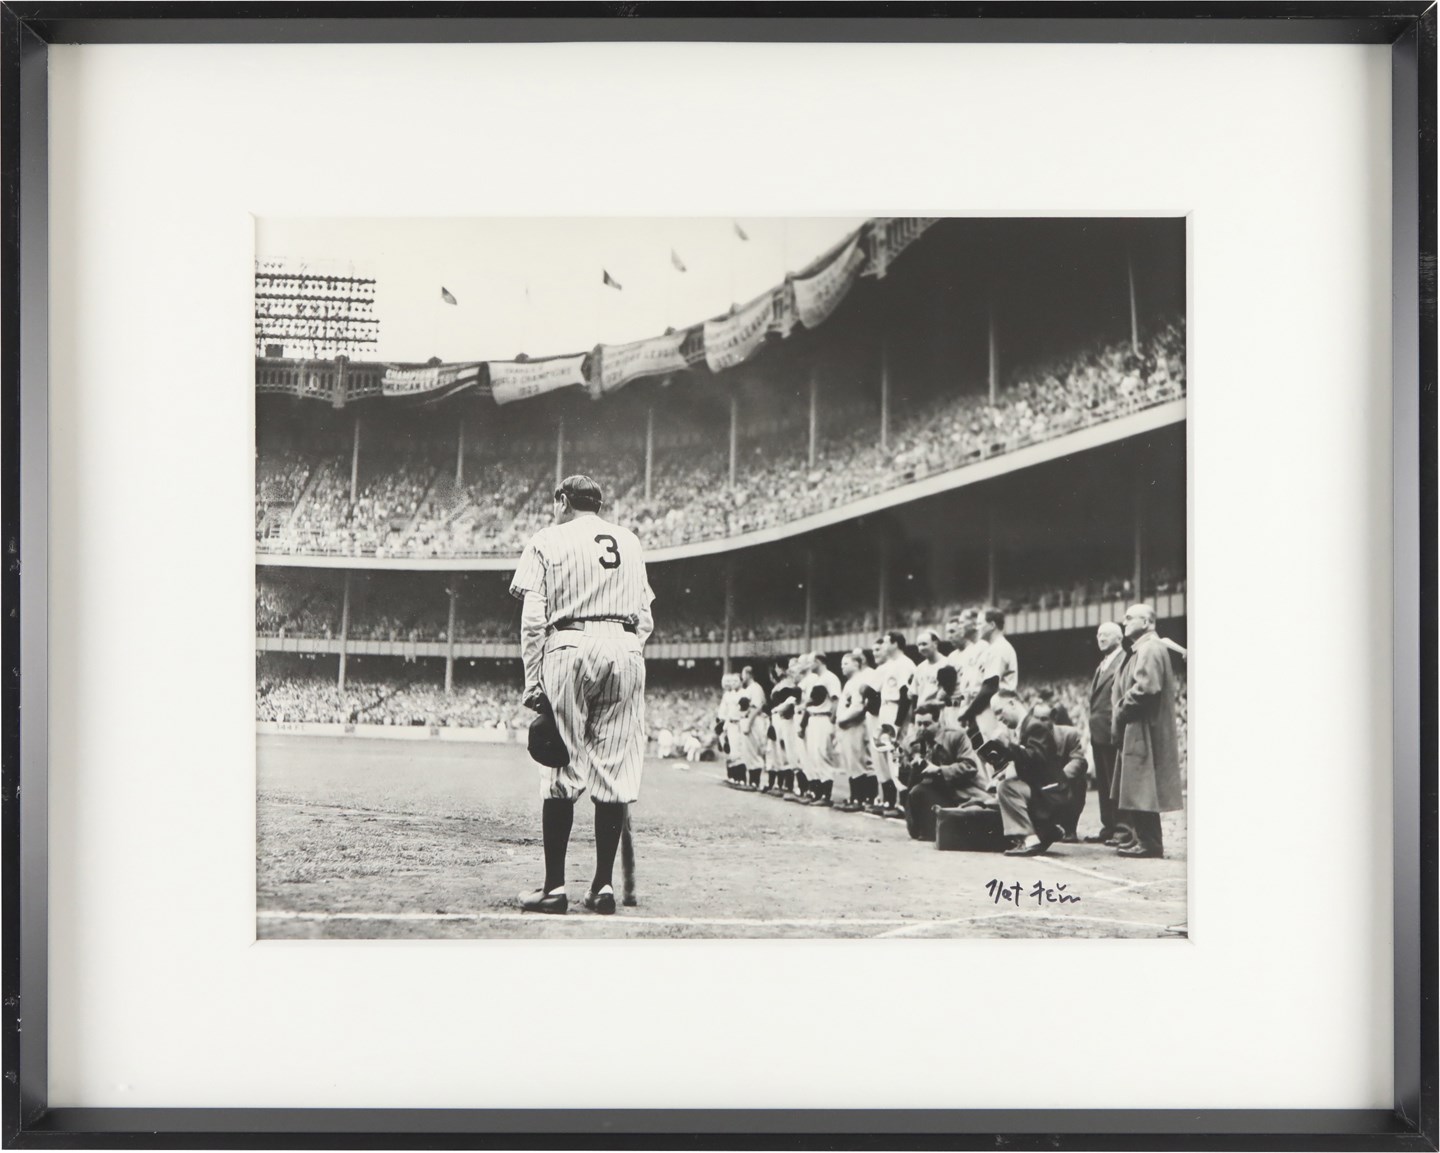 Vintage Sports Photographs - "The Babe Bows Out" Large-Format Photograph Signed by Nat Fein